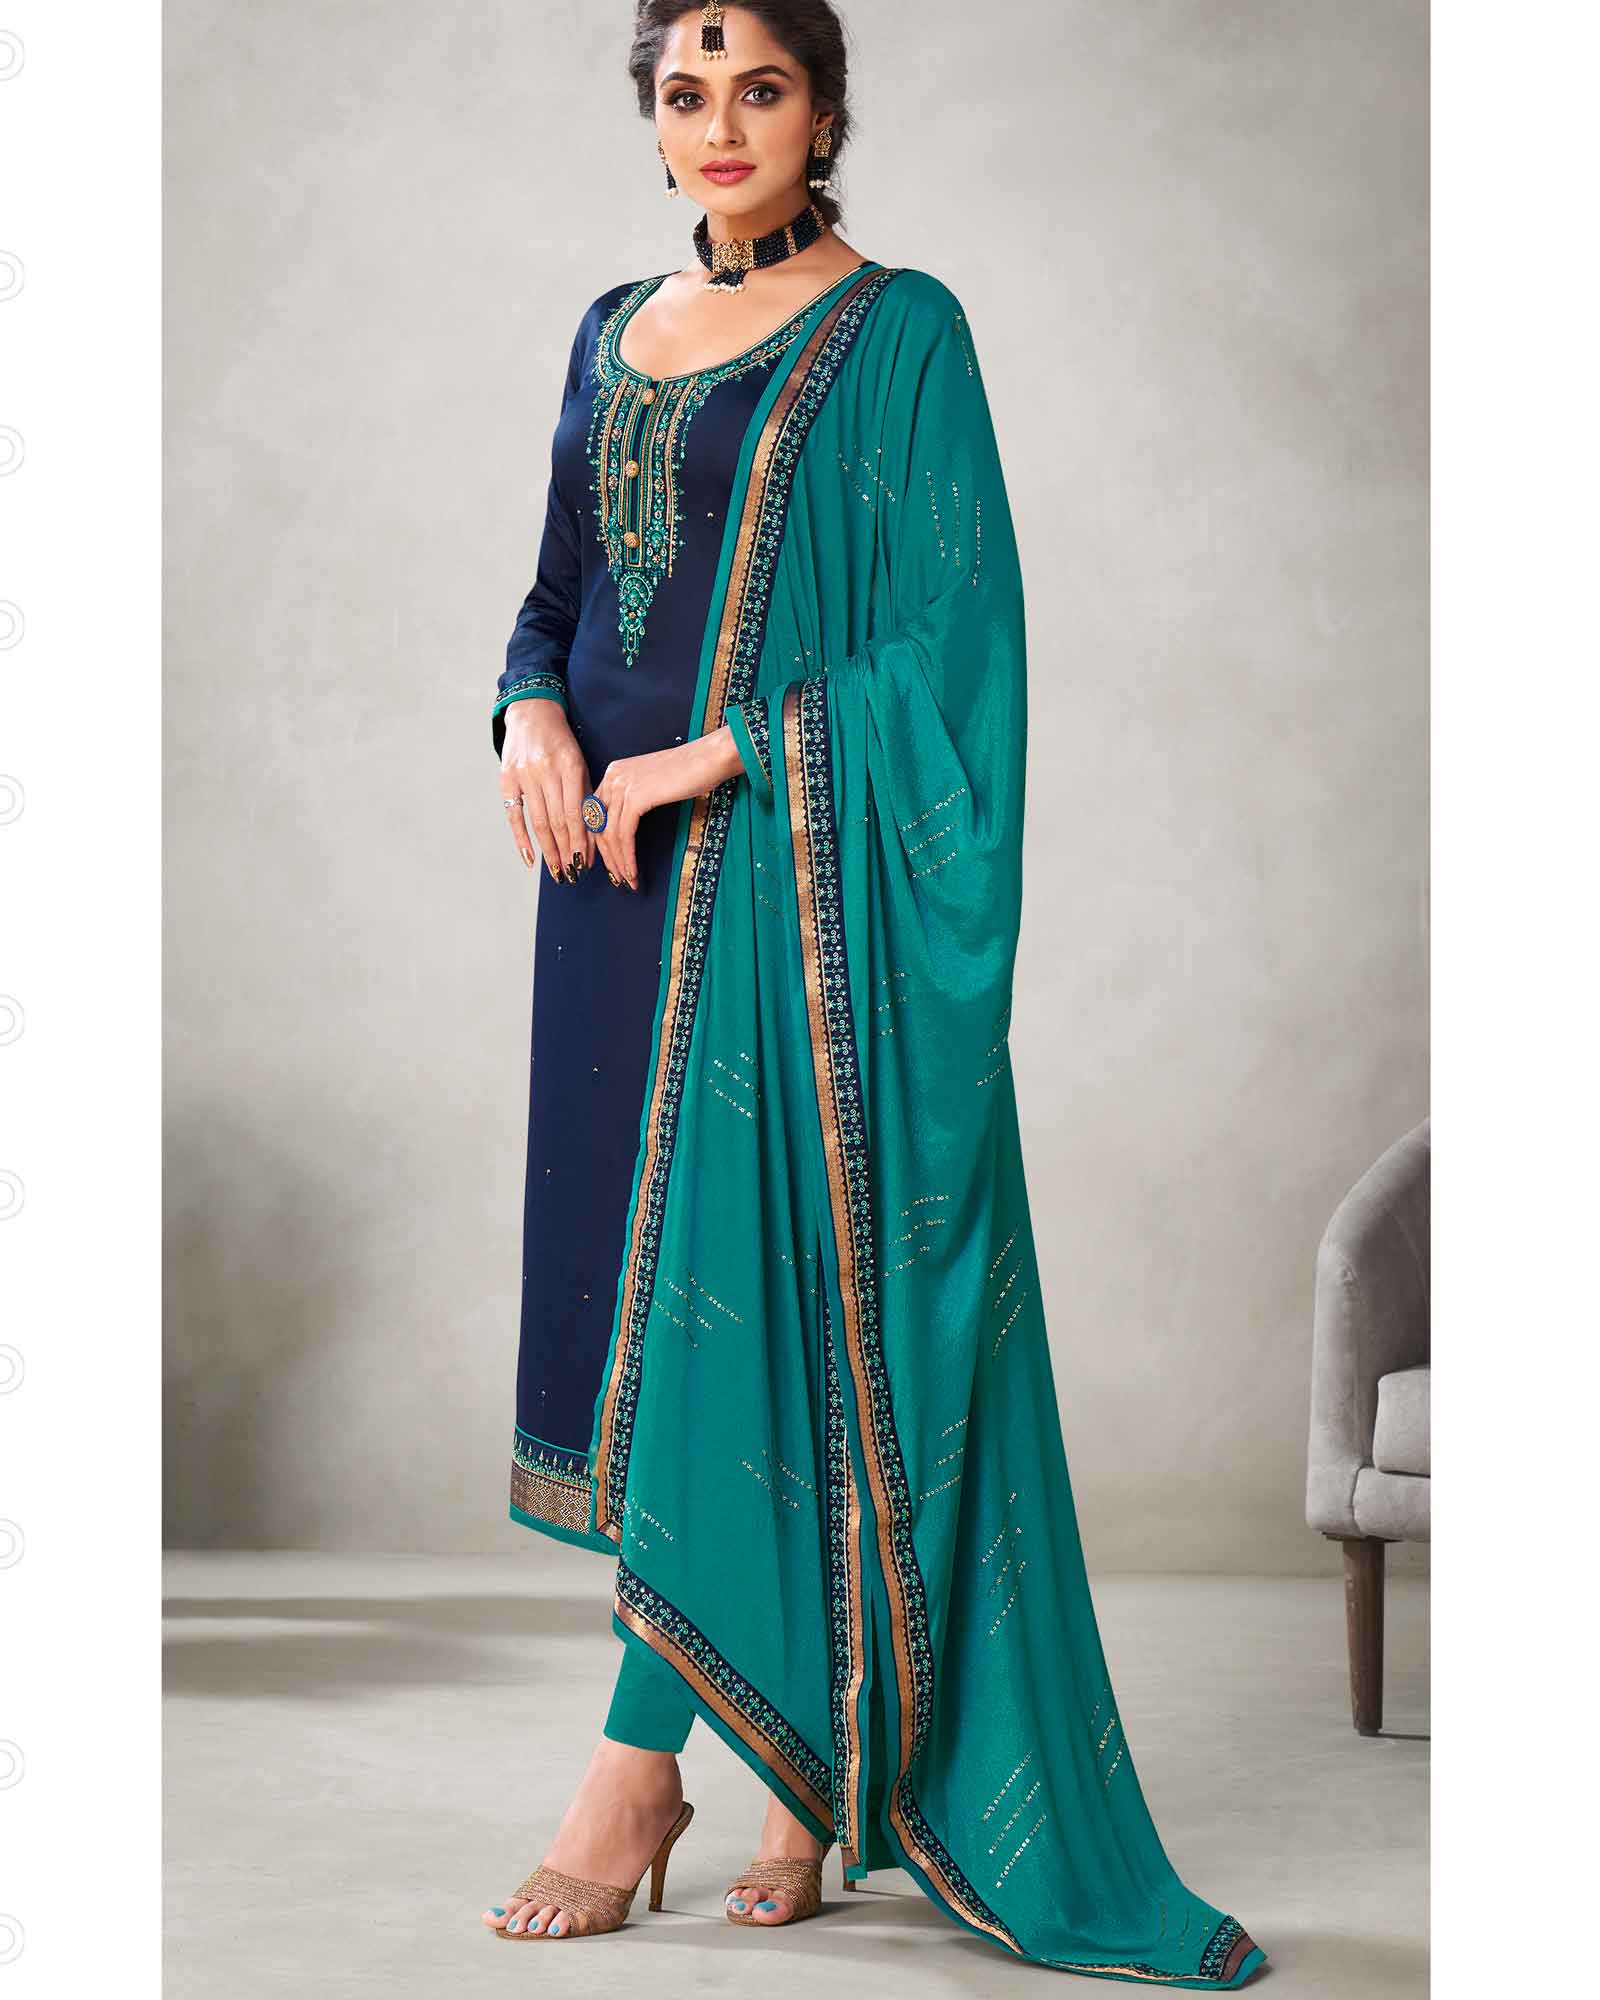 peacock with majenta #beautiful design #punjabi suits #my favourite | Dress  neck designs, Indian dresses, Indian outfits